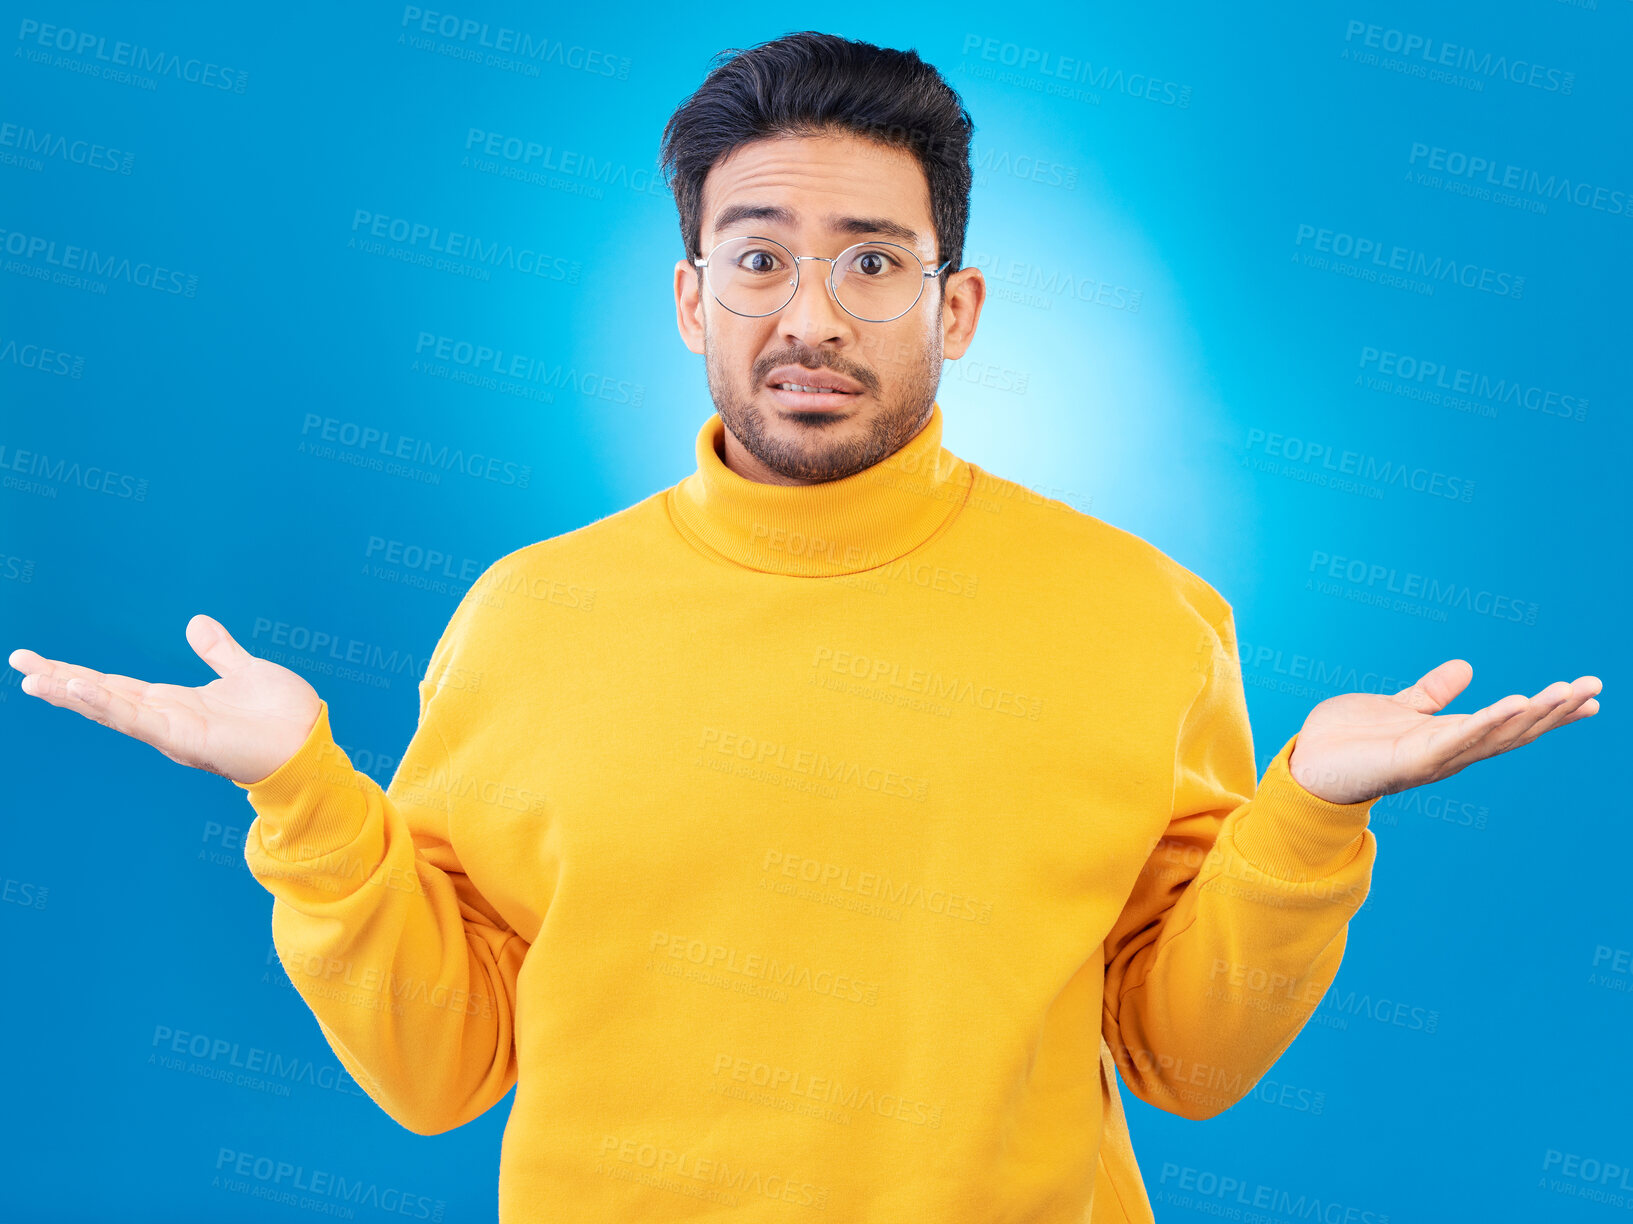 Buy stock photo Confused, shrug and portrait of a man in a studio with an unsure, doubt or question expression. Uncertain, choose and headshot of a male model with a decision gesture isolated by a blue background.